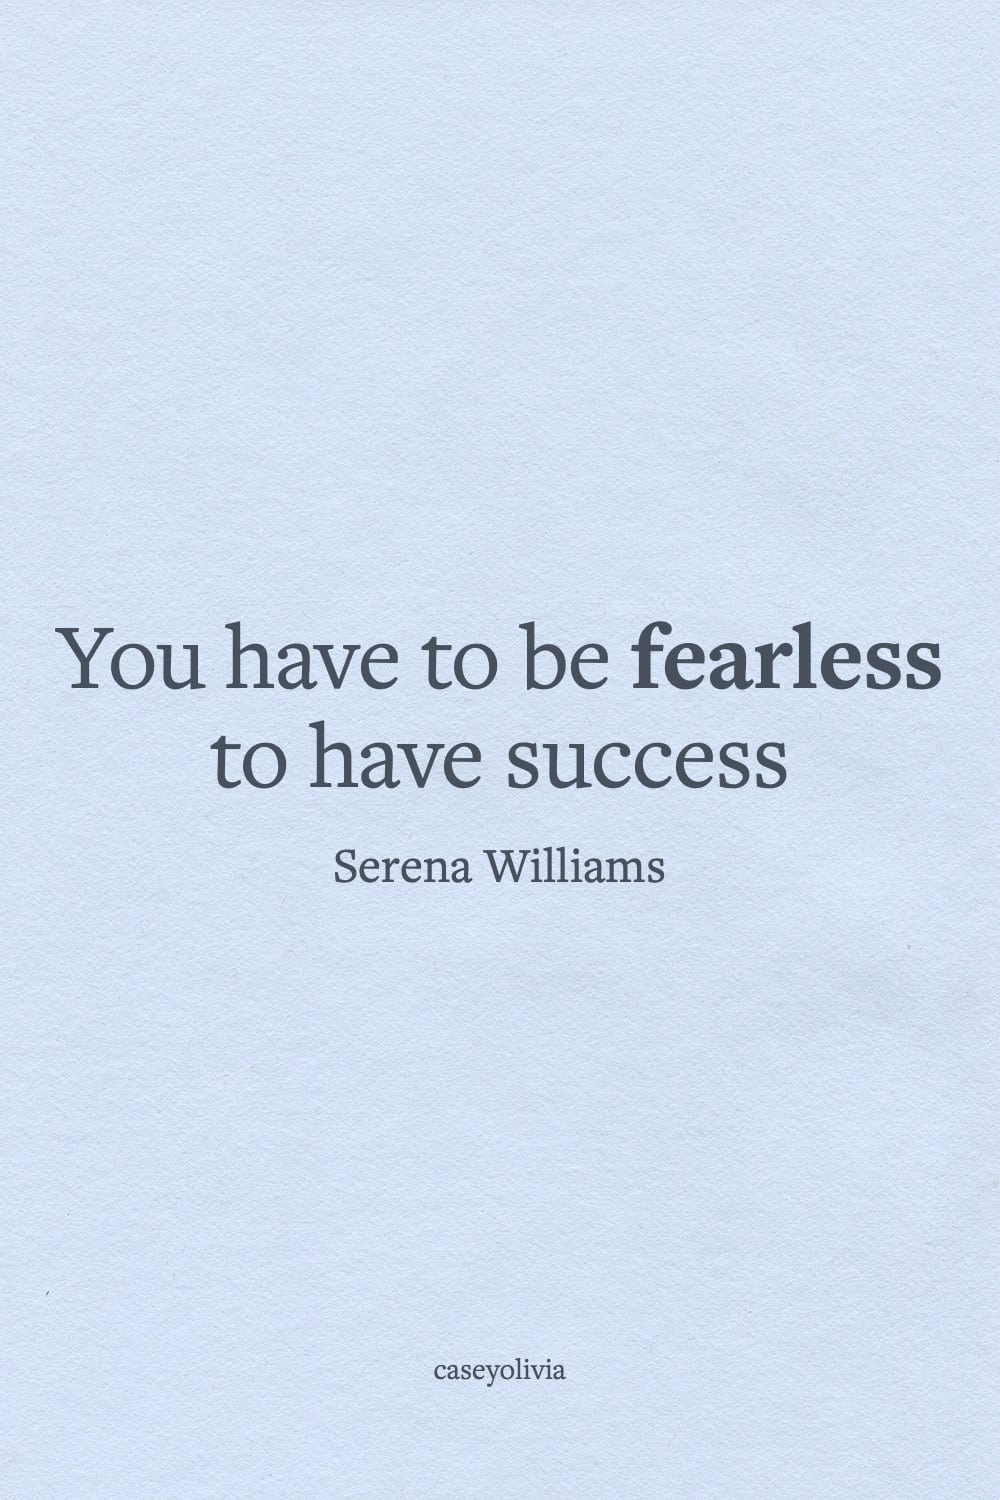 be fearless quote about success